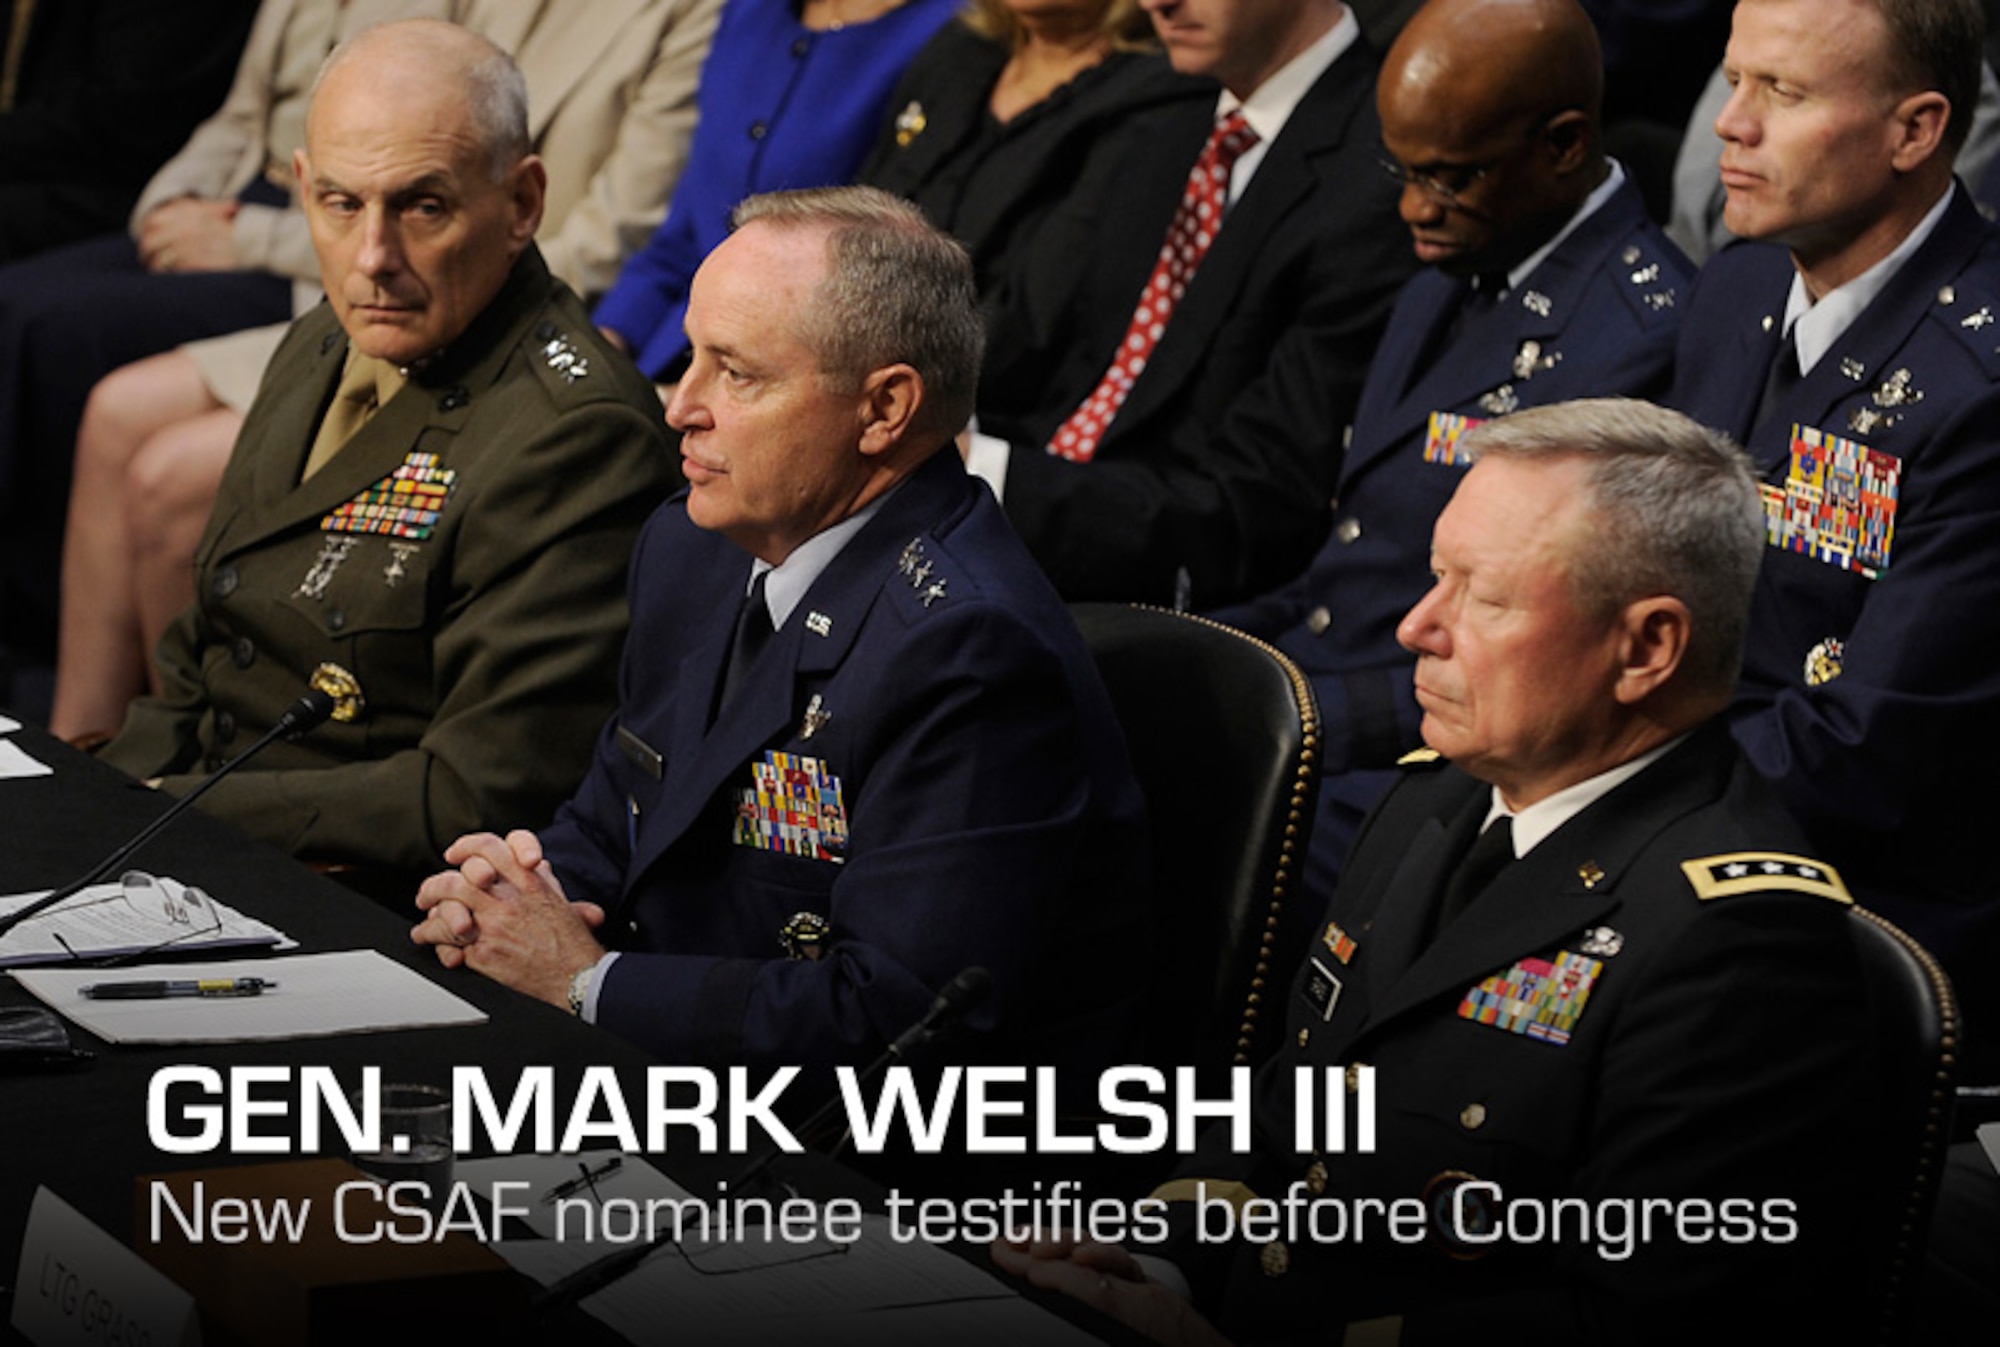 Gen. Mark A. Welsh III, the commander of U.S. Air Forces in Europe, testifies before the Senate Armed Services Committee in Washington, D.C., on July 19, 2012, as part of the confirmation process to serve as the 20th Air Force Chief of Staff.  If confirmed, Welsh will replace Gen. Norton Schwartz, who retires Aug. 10.  Additional witnesses before the committee were Lt. Gen. John F. Kelly, U.S. Marine Corps, who is nominated to the rank of general and to take command of U.S. Southern Command, and Lt. Gen. Frank Grass, Army National Guard, also nominated for the rank of general and for appointment as the Chief of the National Guard Bureau. (U.S. Air Force photo/Scott M. Ash)